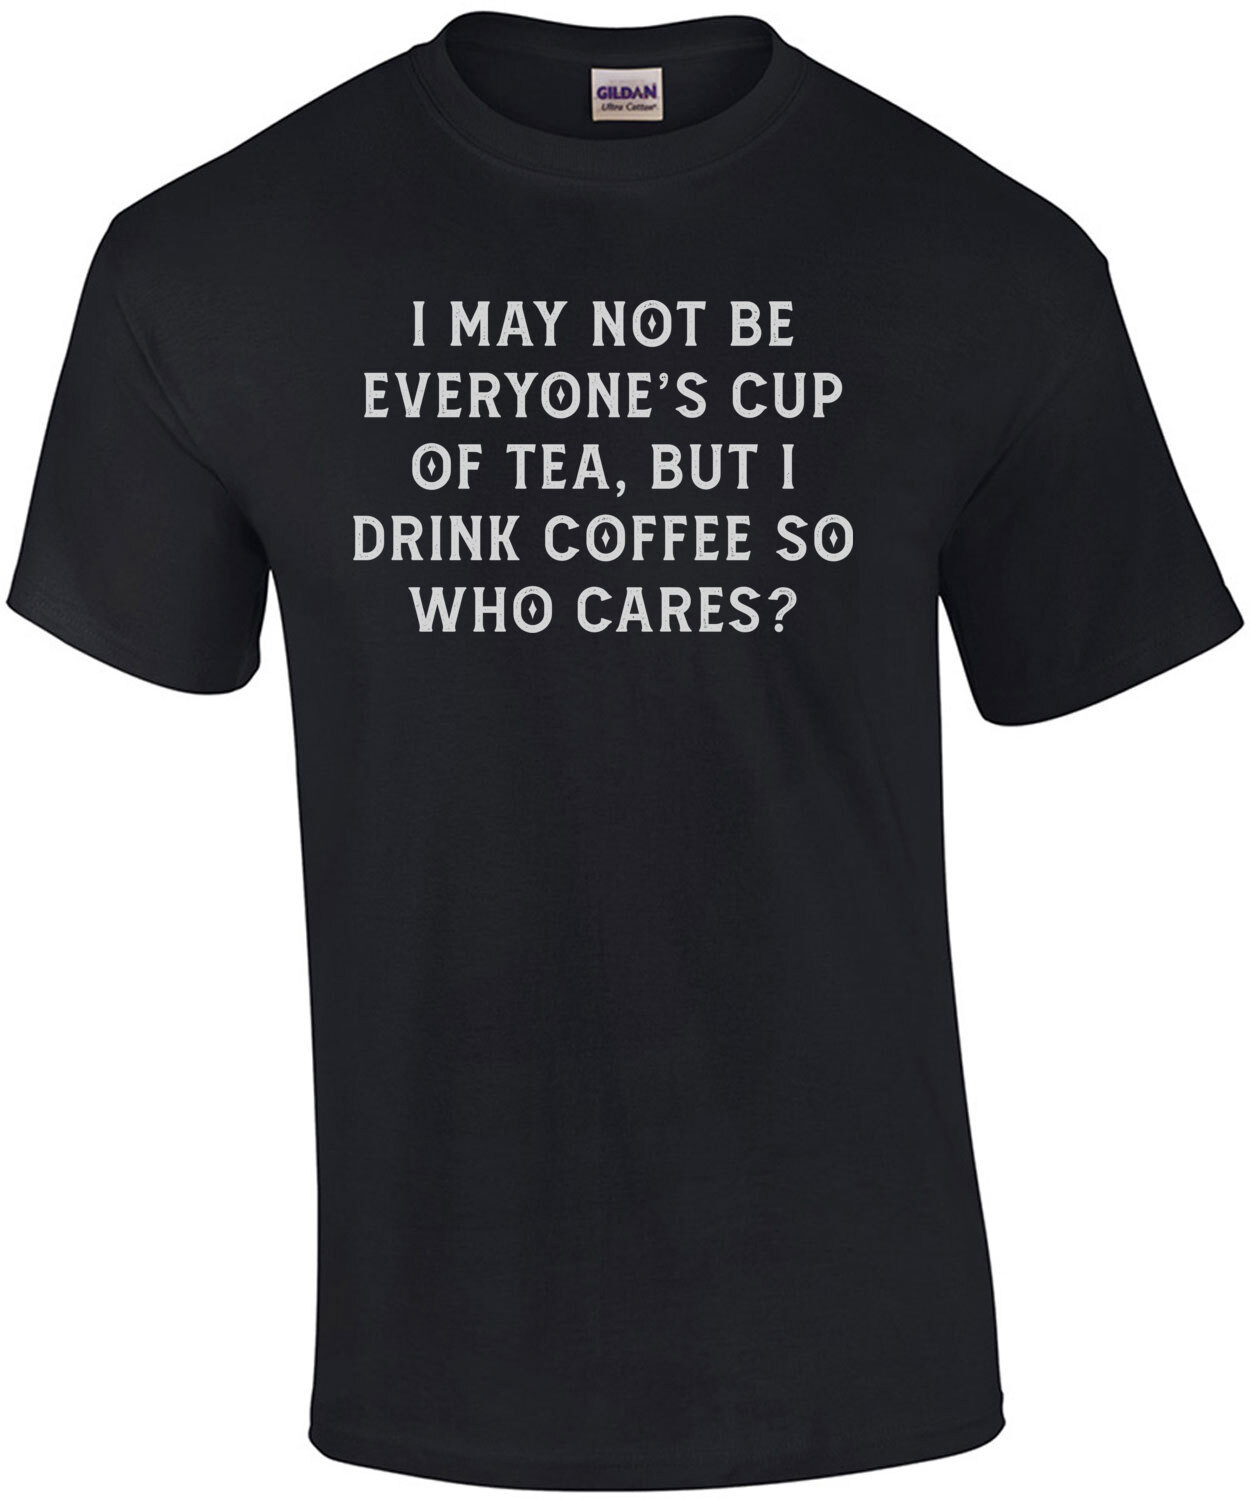 I may not be everyone's cup of tea, but I drink coffee so who cares. Funny T-Shirt